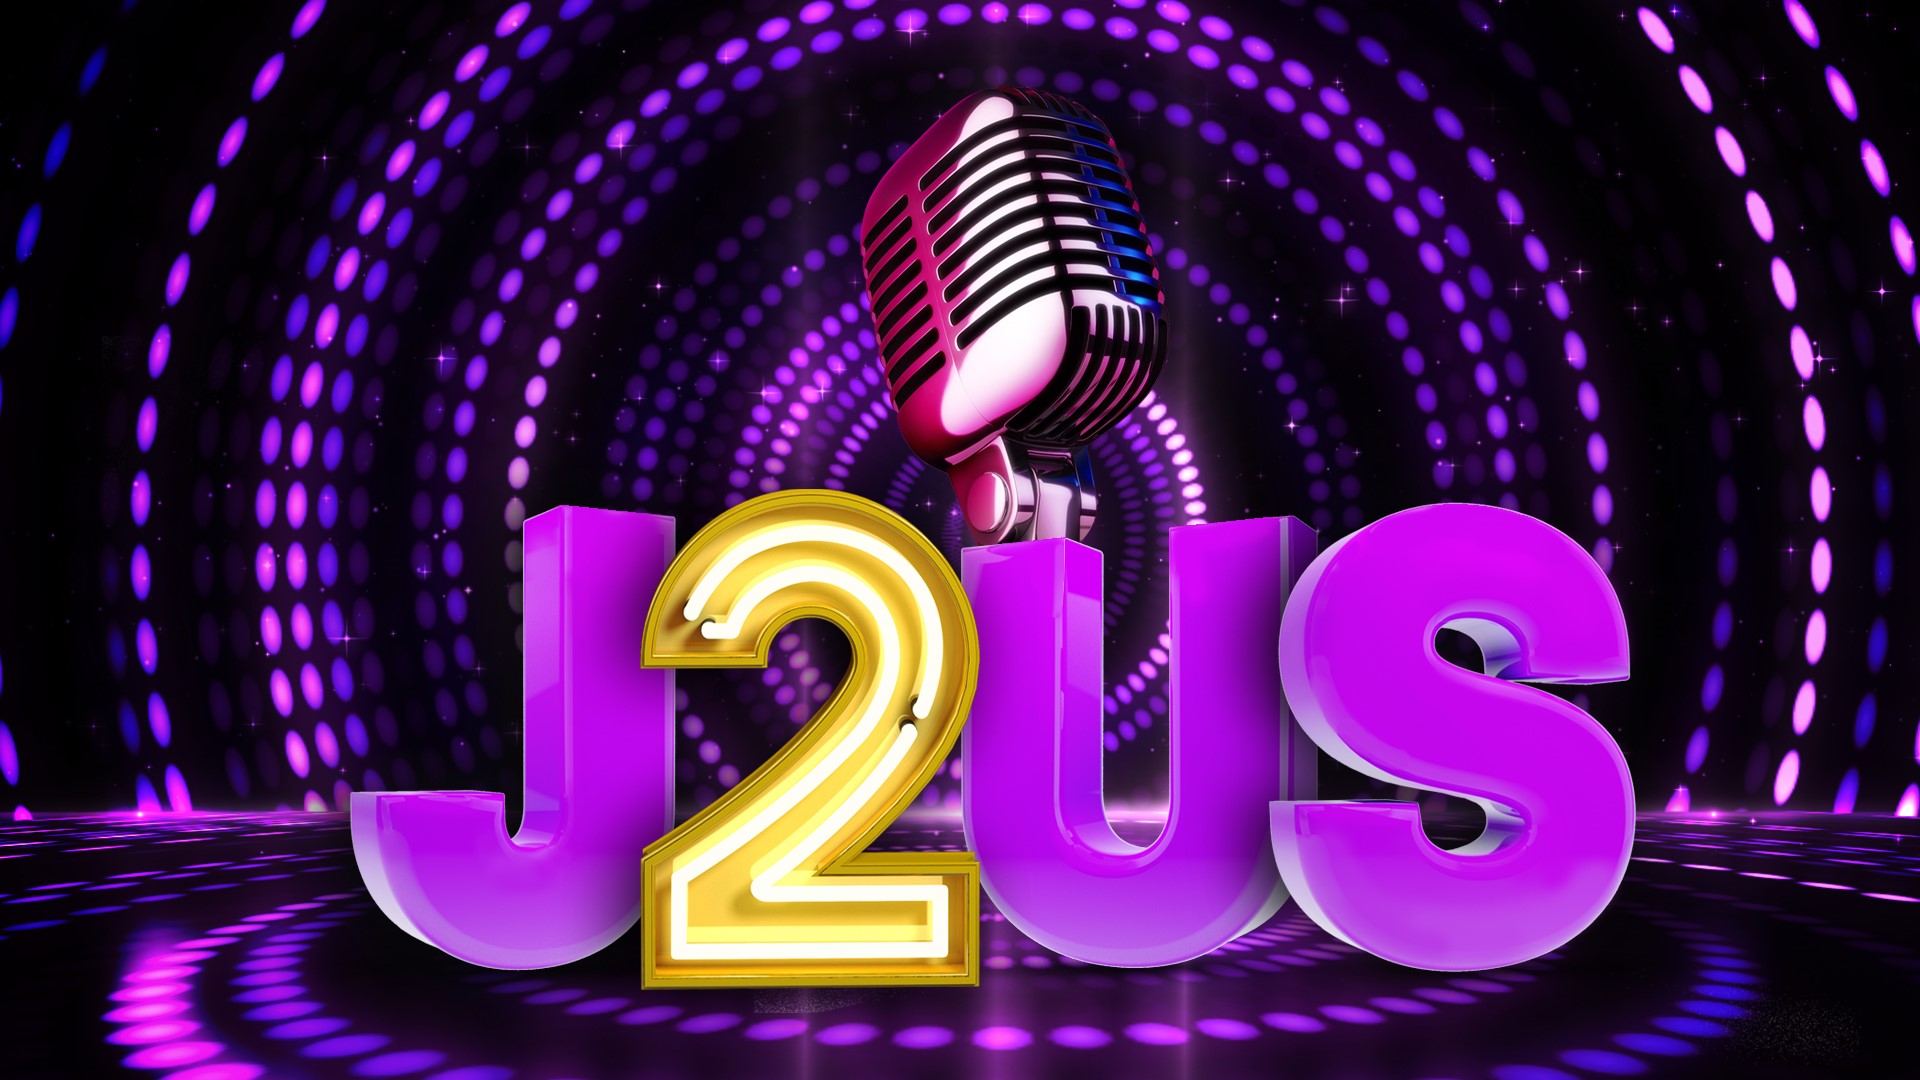 J2US - Just the 2 of us